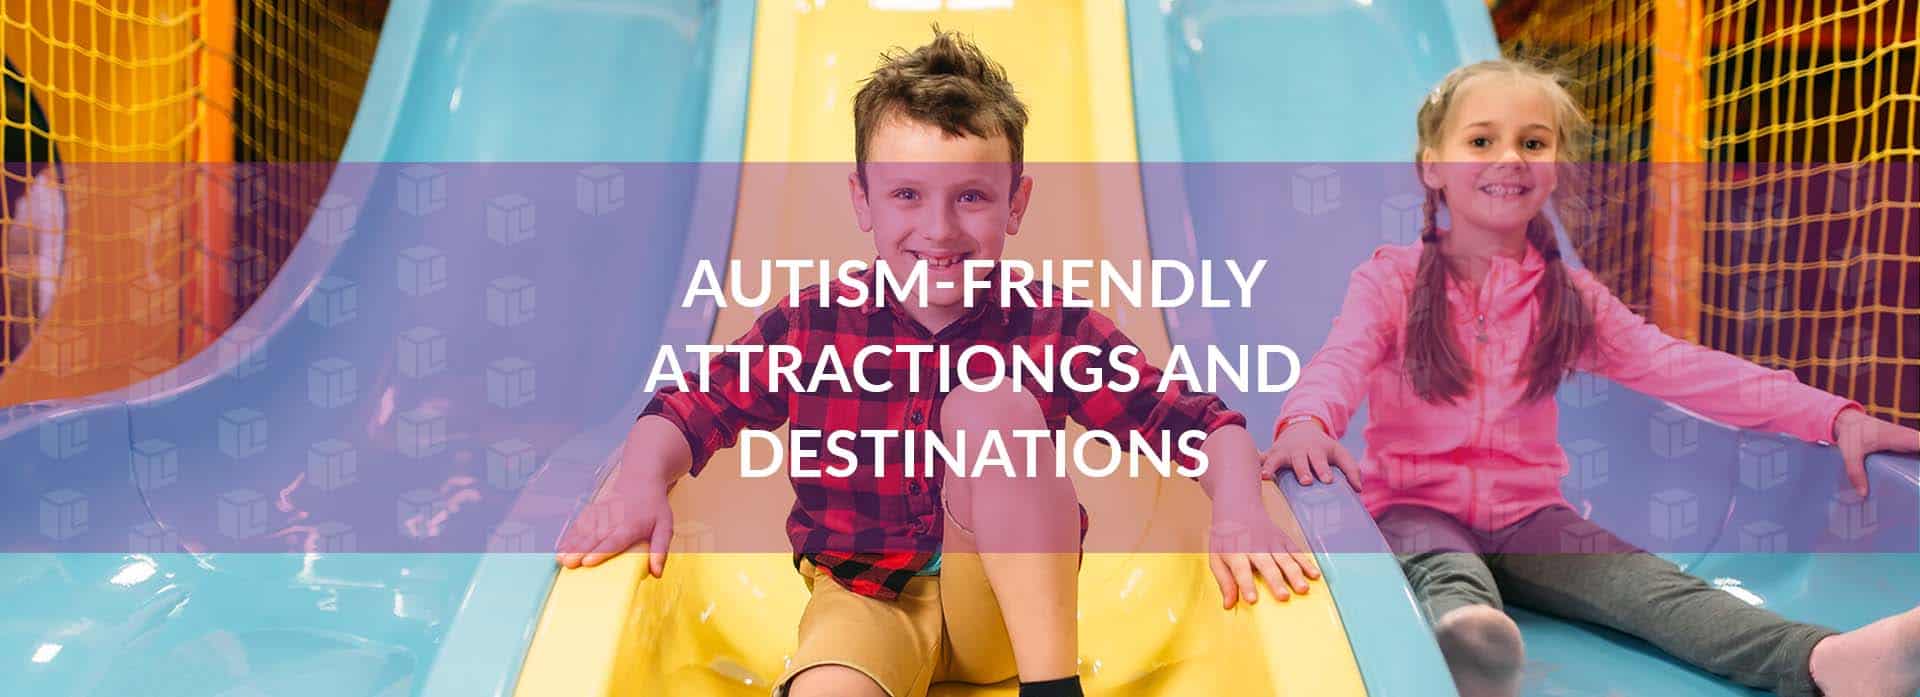 Autism-Friendly Attractions And Destinations